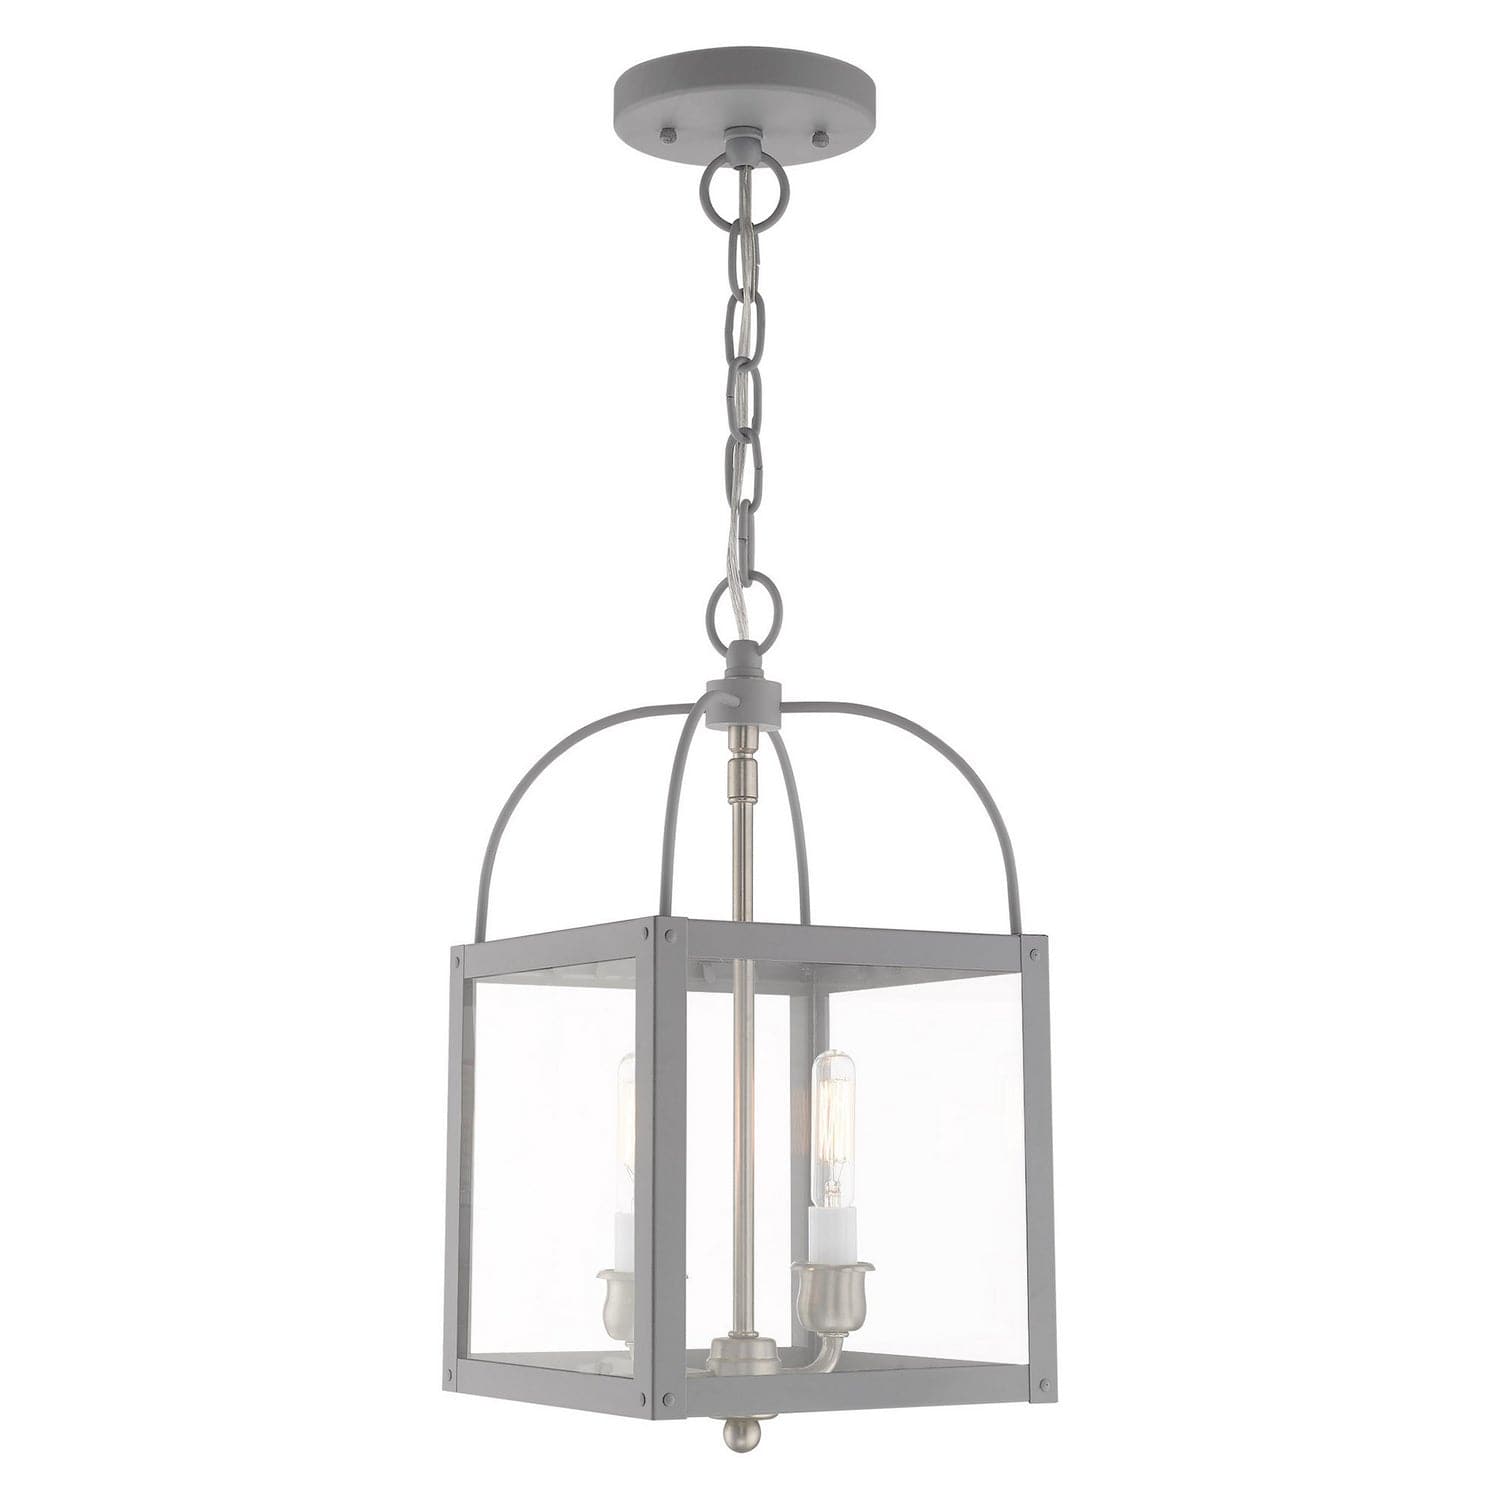 Livex Lighting - 4041-80 - Two Light Mini Pendant/Ceiling Mount - Milford - Nordic Gray w/ Brushed Nickel Cluster